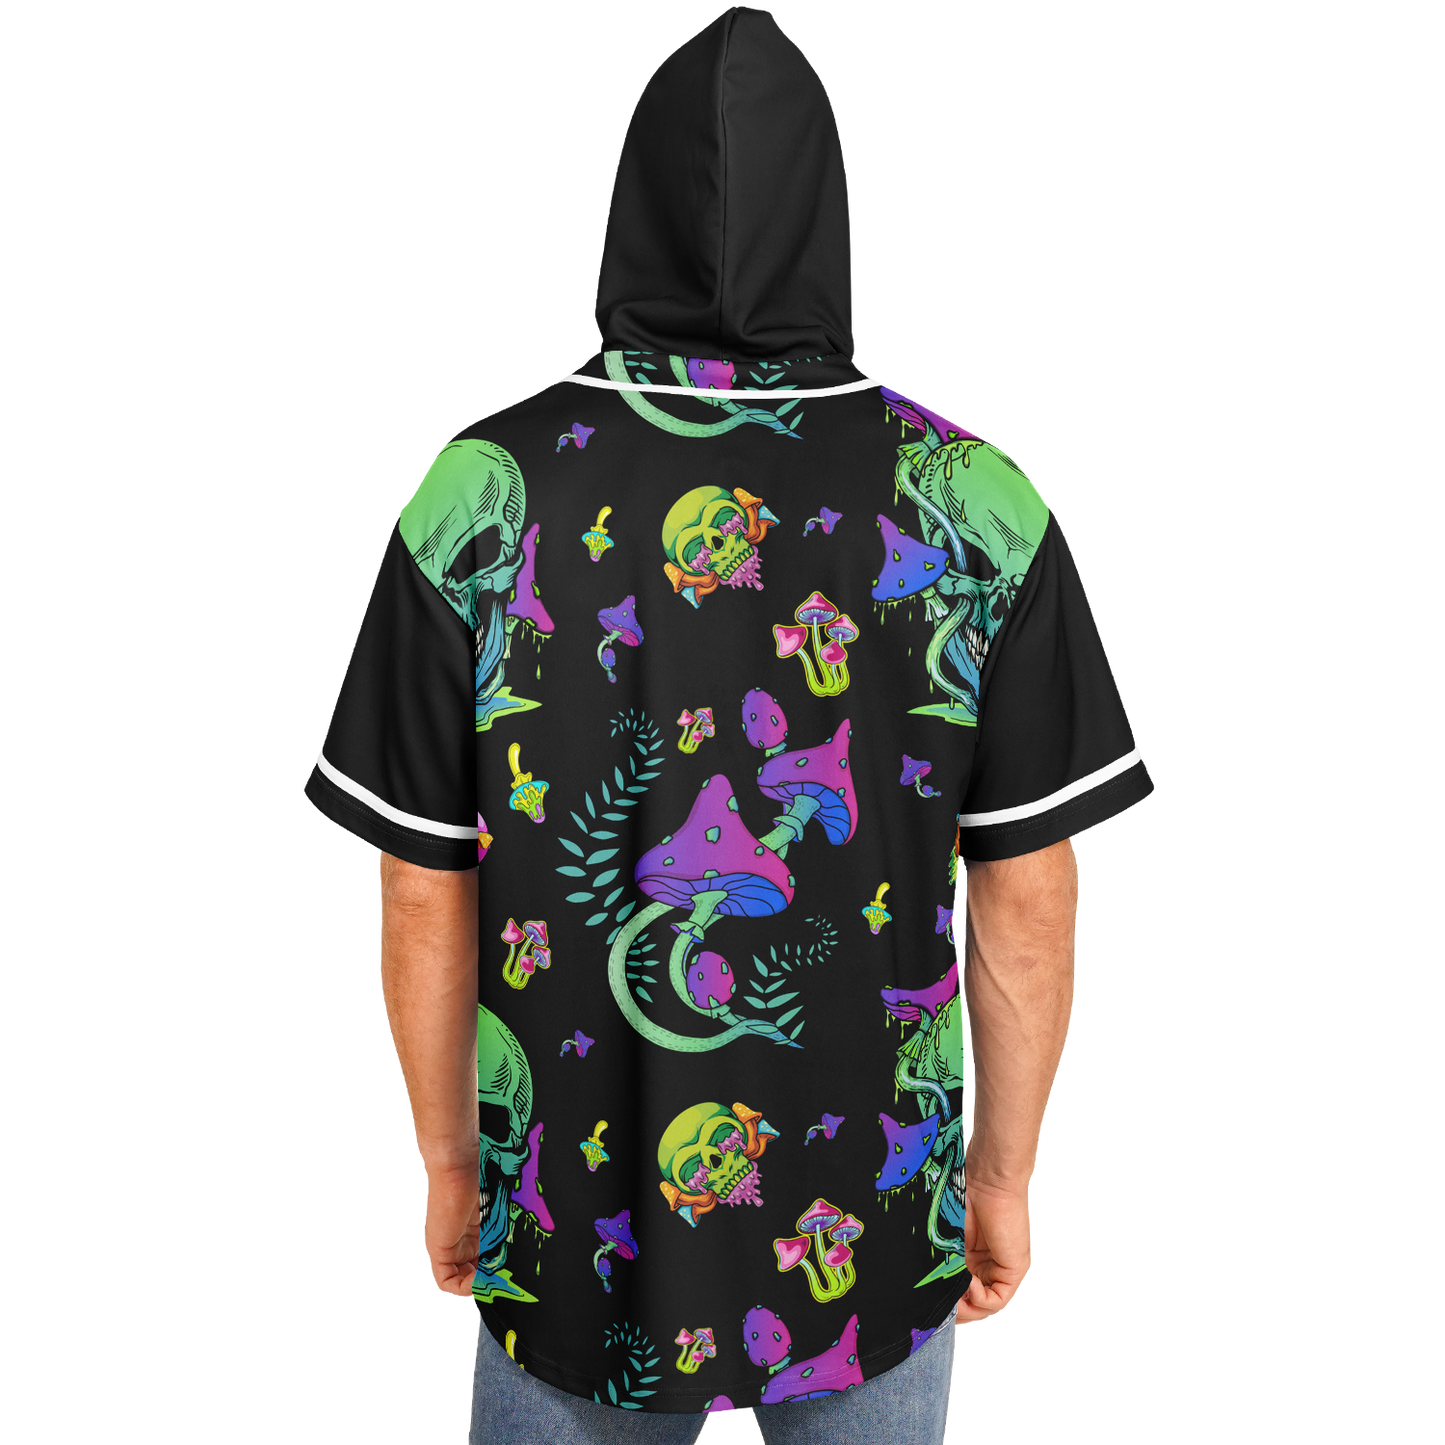 Green Dreams EDM Jersey - Available for a Strictly Limited Time | Buy 2 for FREE Shipping